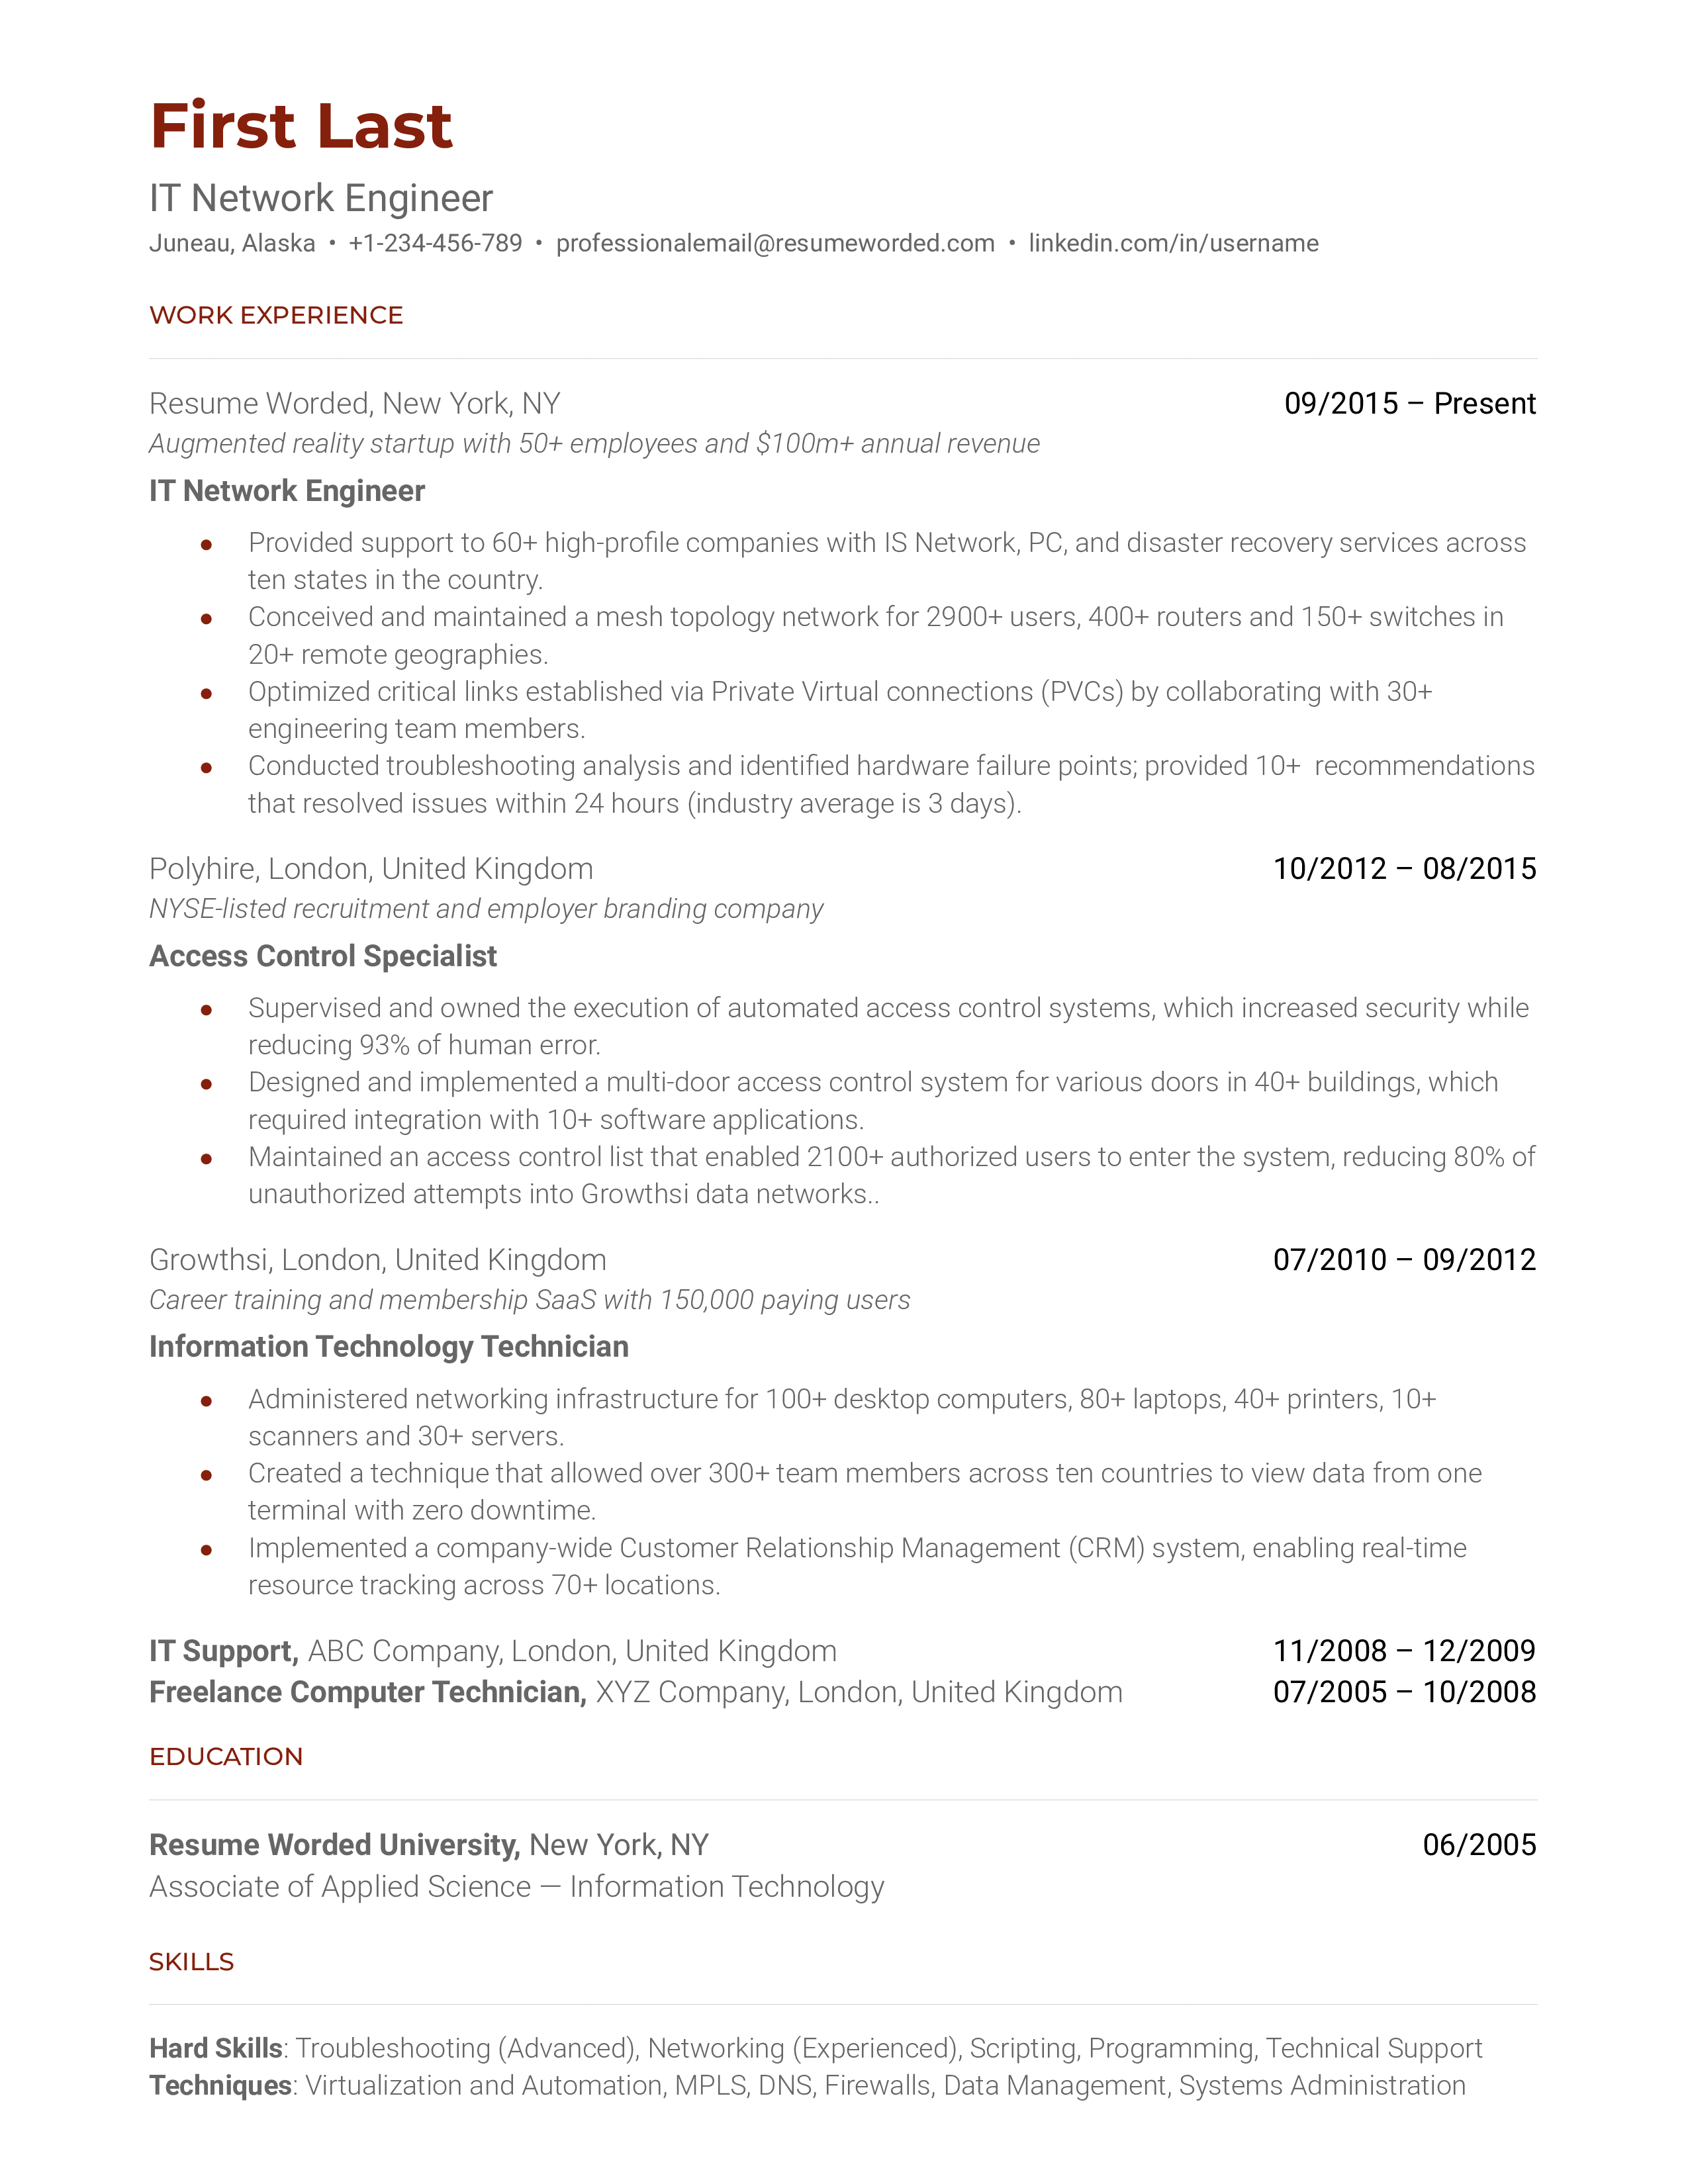 A IT network engineer resume template using strong action verbs.